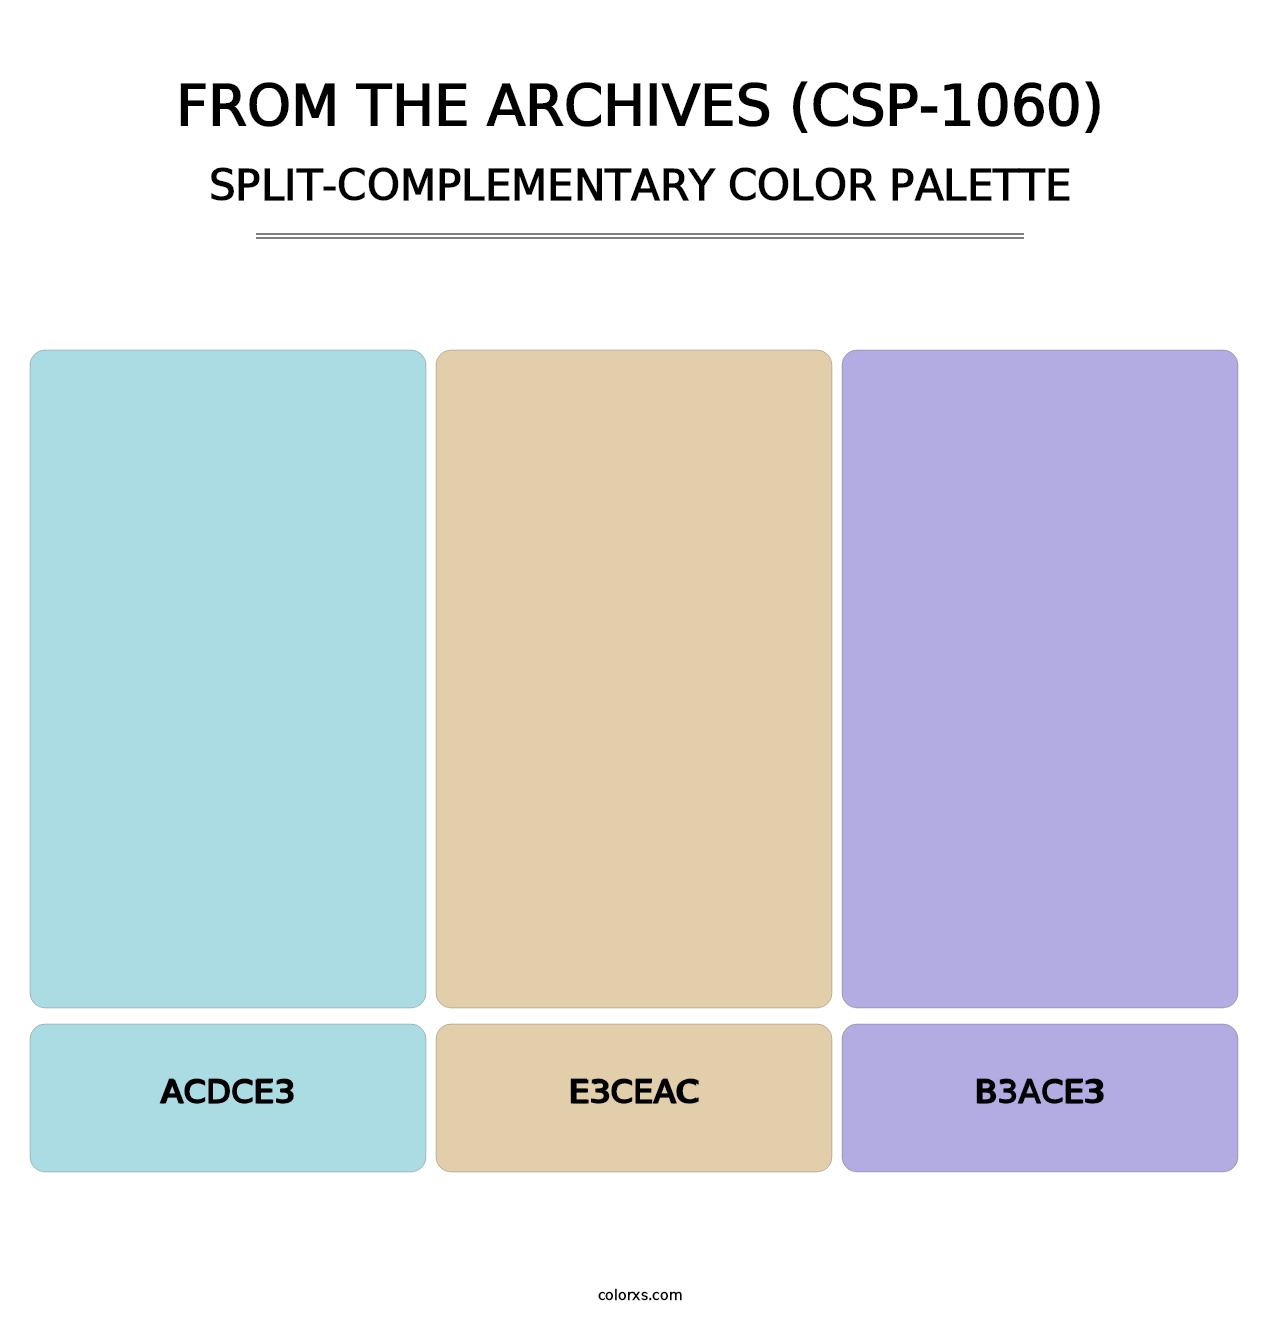 From the Archives (CSP-1060) - Split-Complementary Color Palette